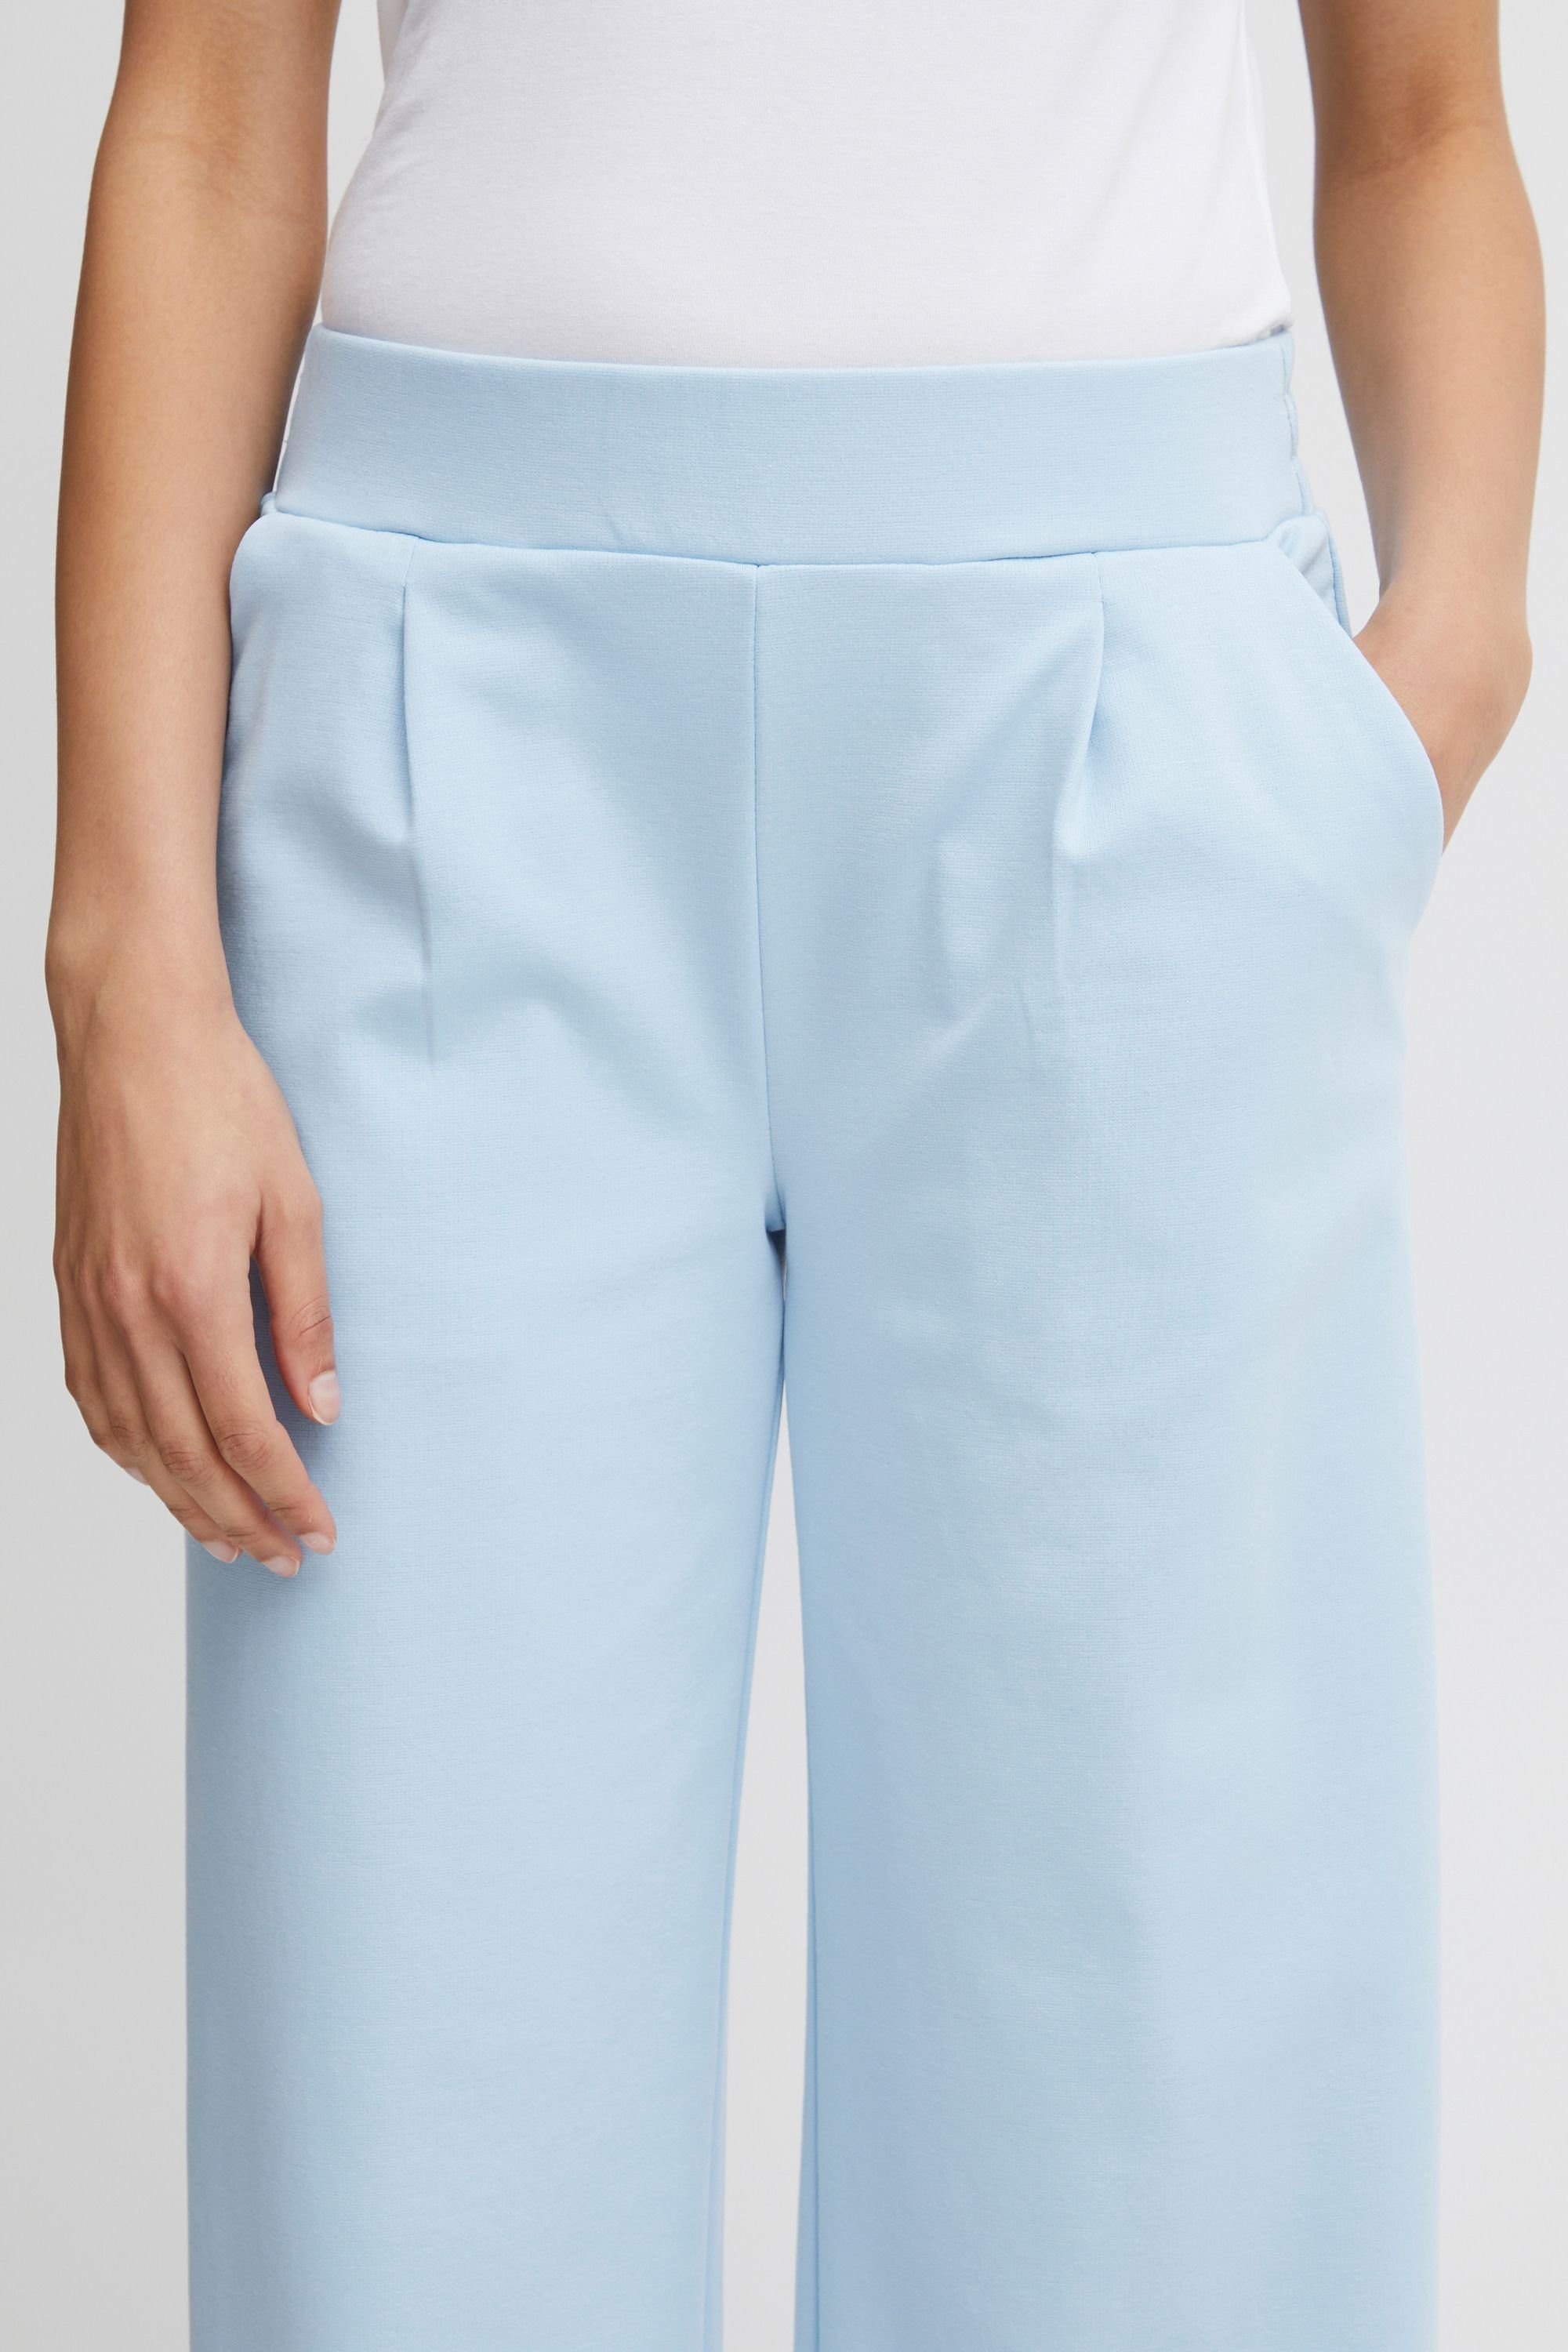 Bell PANTS b.young 2 Blue 2 20812847 - WIDE (144121) BYRIZETTA Stoffhose